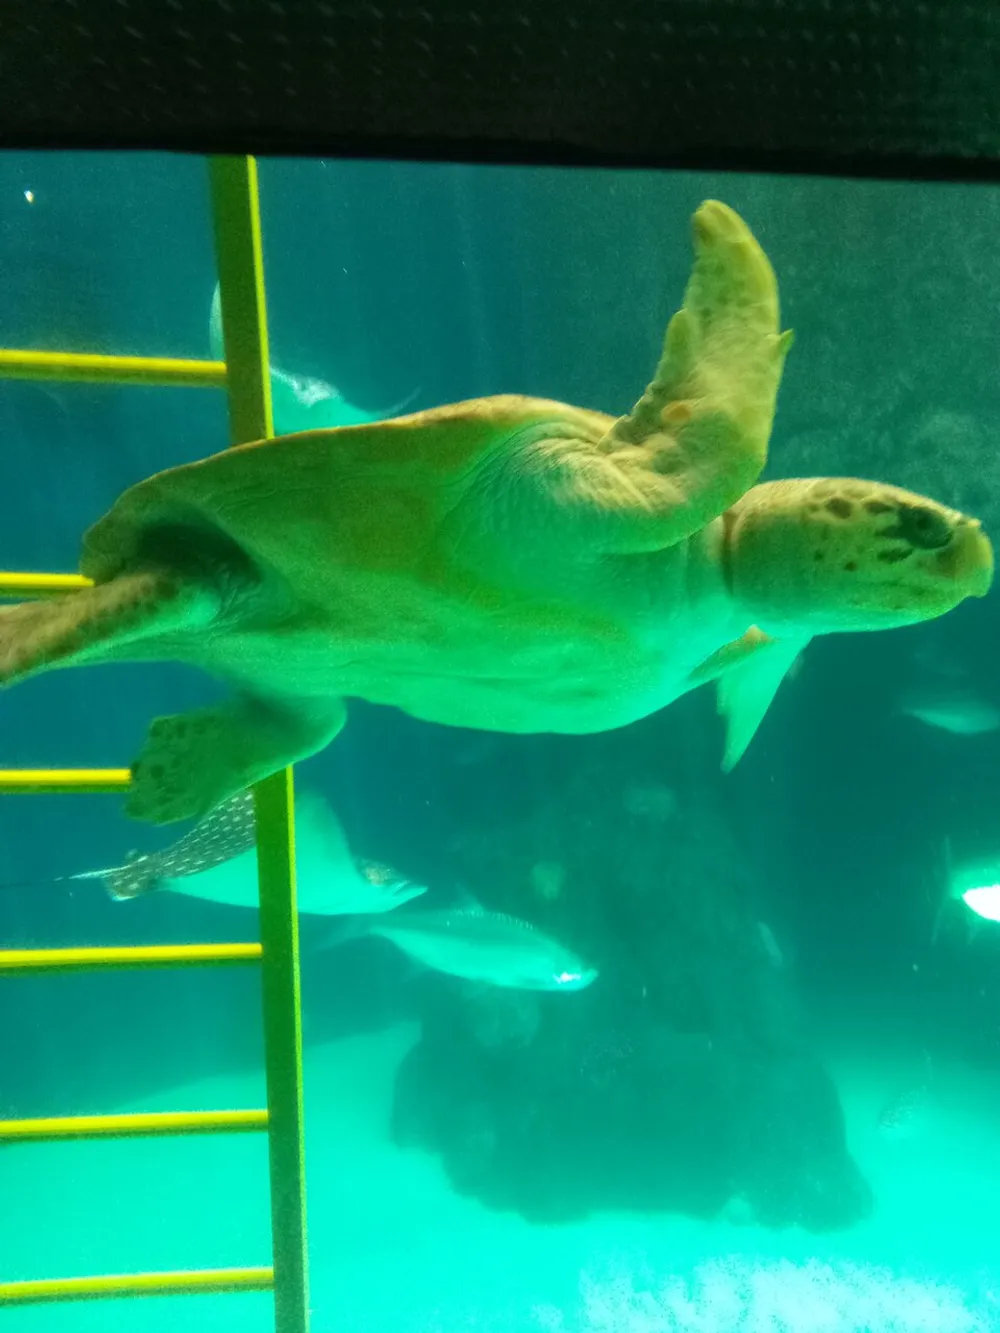 A sea turtle is swimming in an aquarium with several fish visible in the background captured through a glass pane with a yellow ladder structure to one side